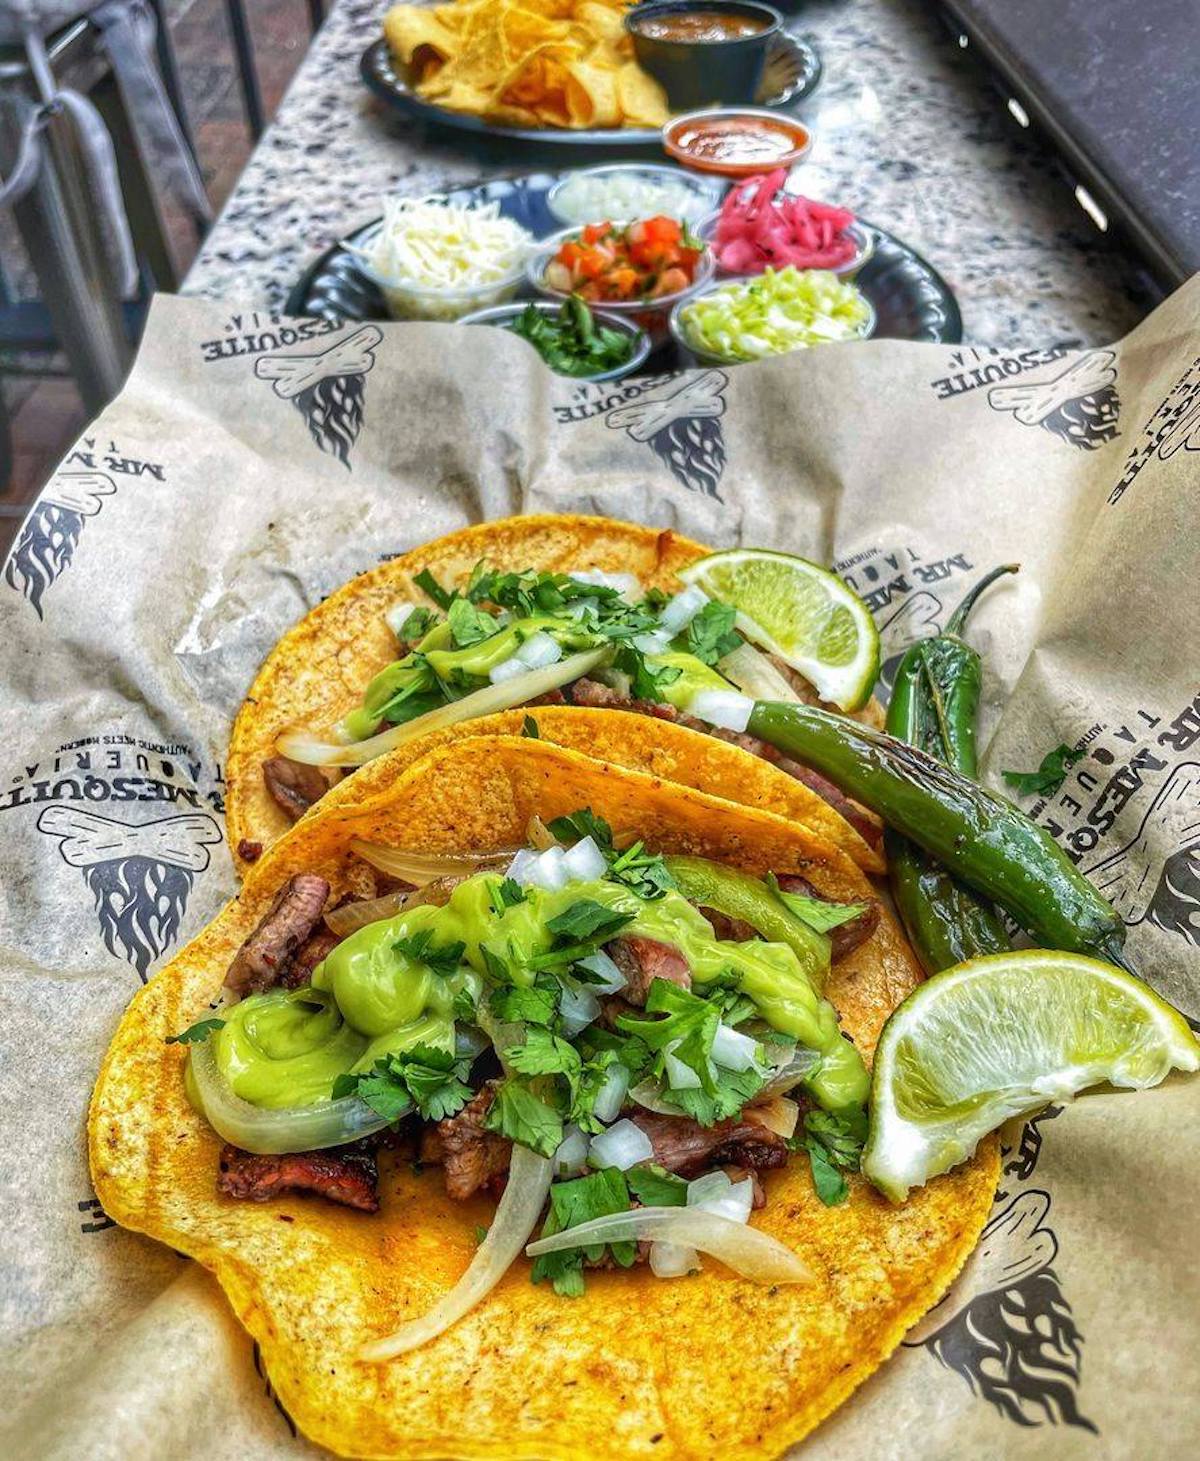 Eighth Mesquite Fresh Street Mex Brick-and-Mortar to Open in North Phoenix